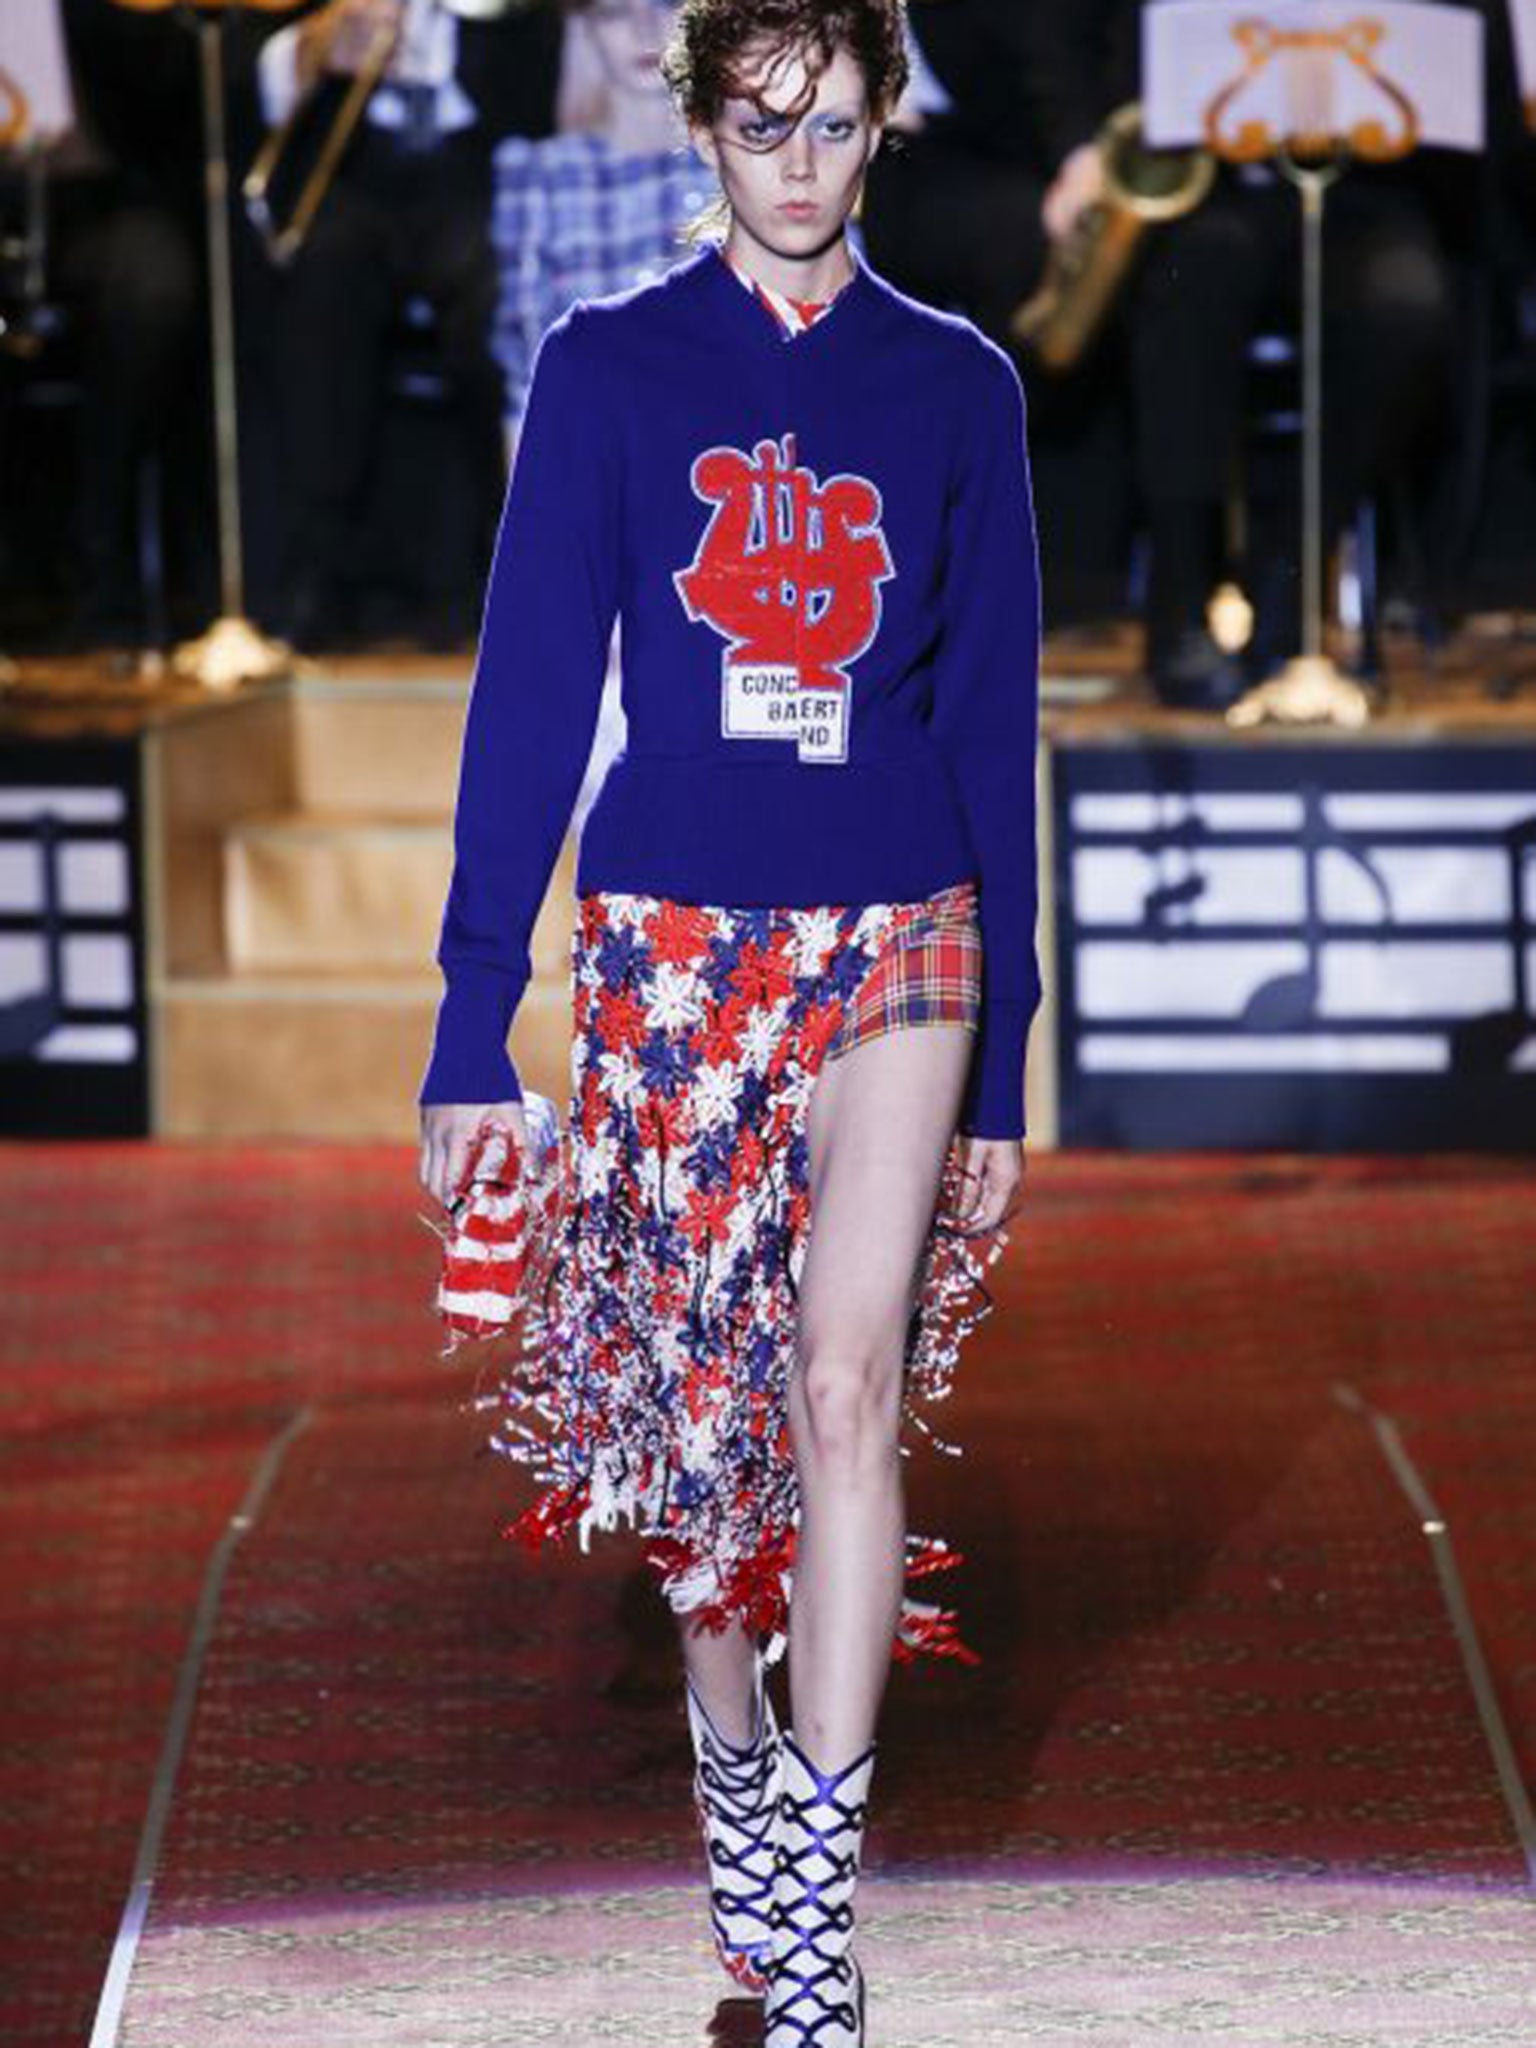 Marc Jacobs disrupted his clean-cut all-American collection